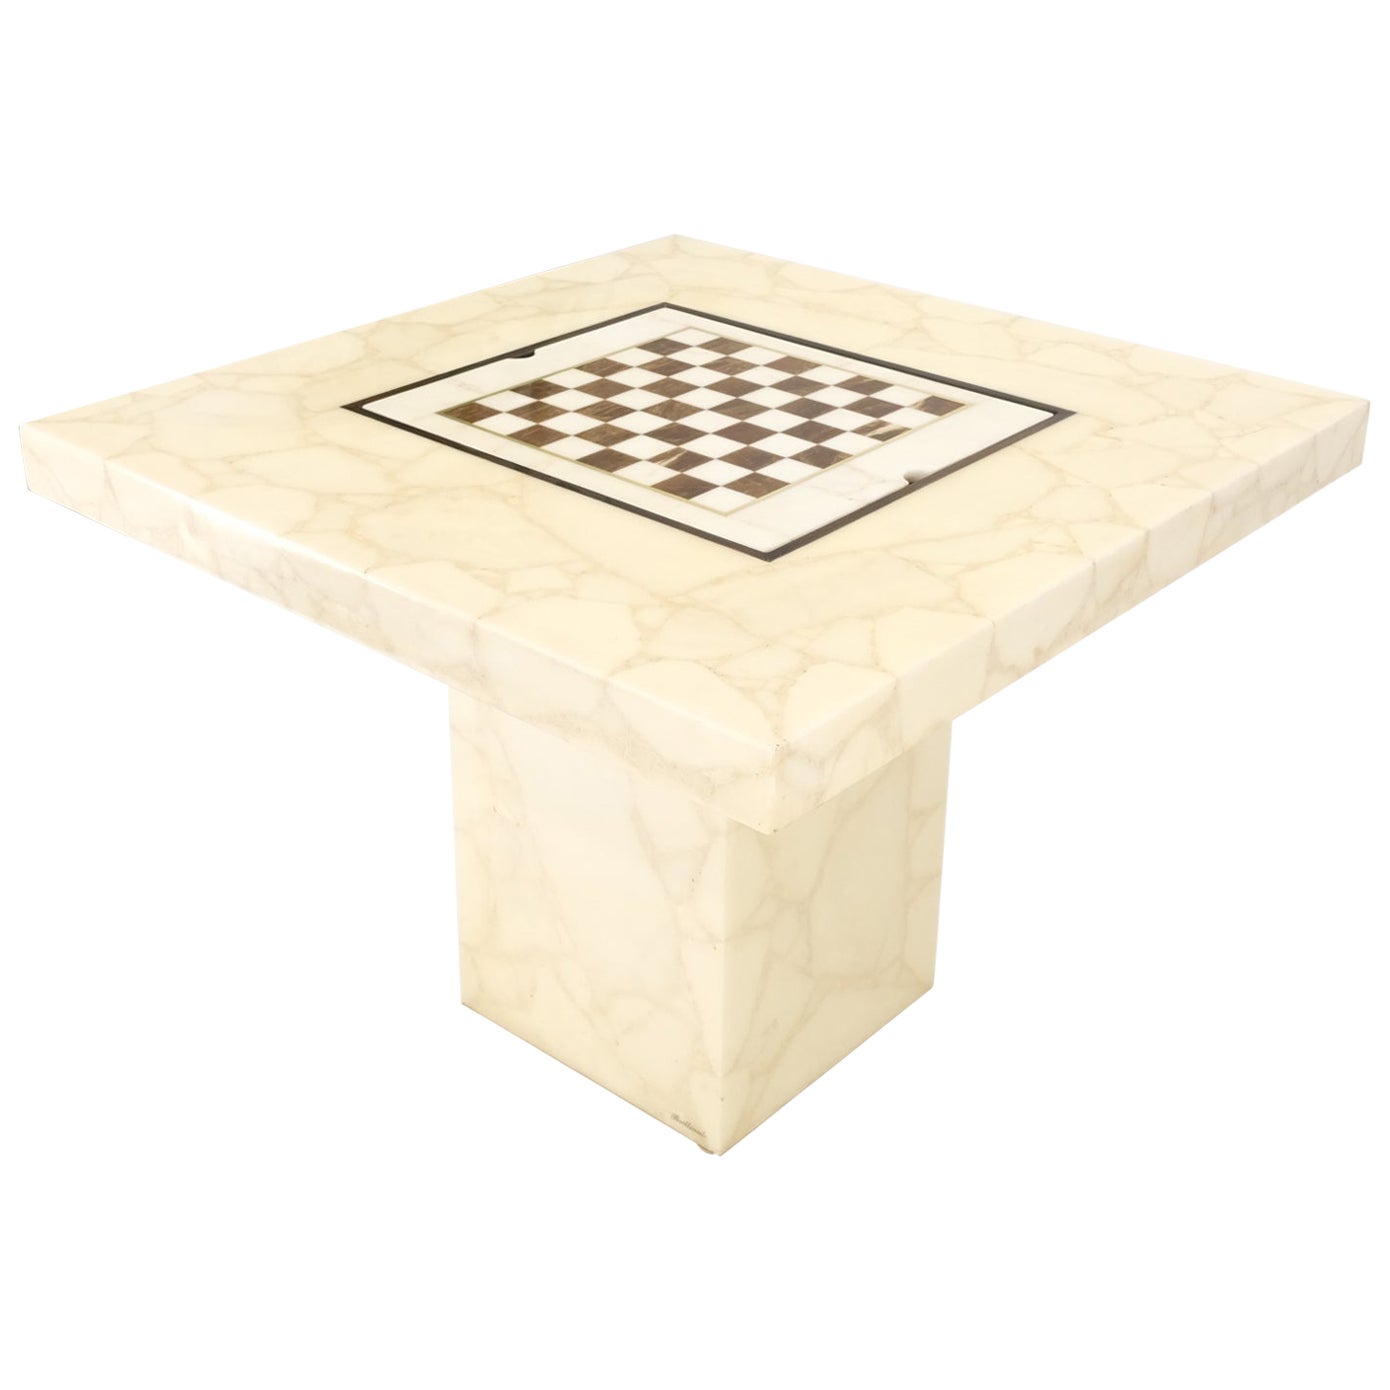 Single Pedestal Base Marble Square Dining Game Table Flip Top Chess Board